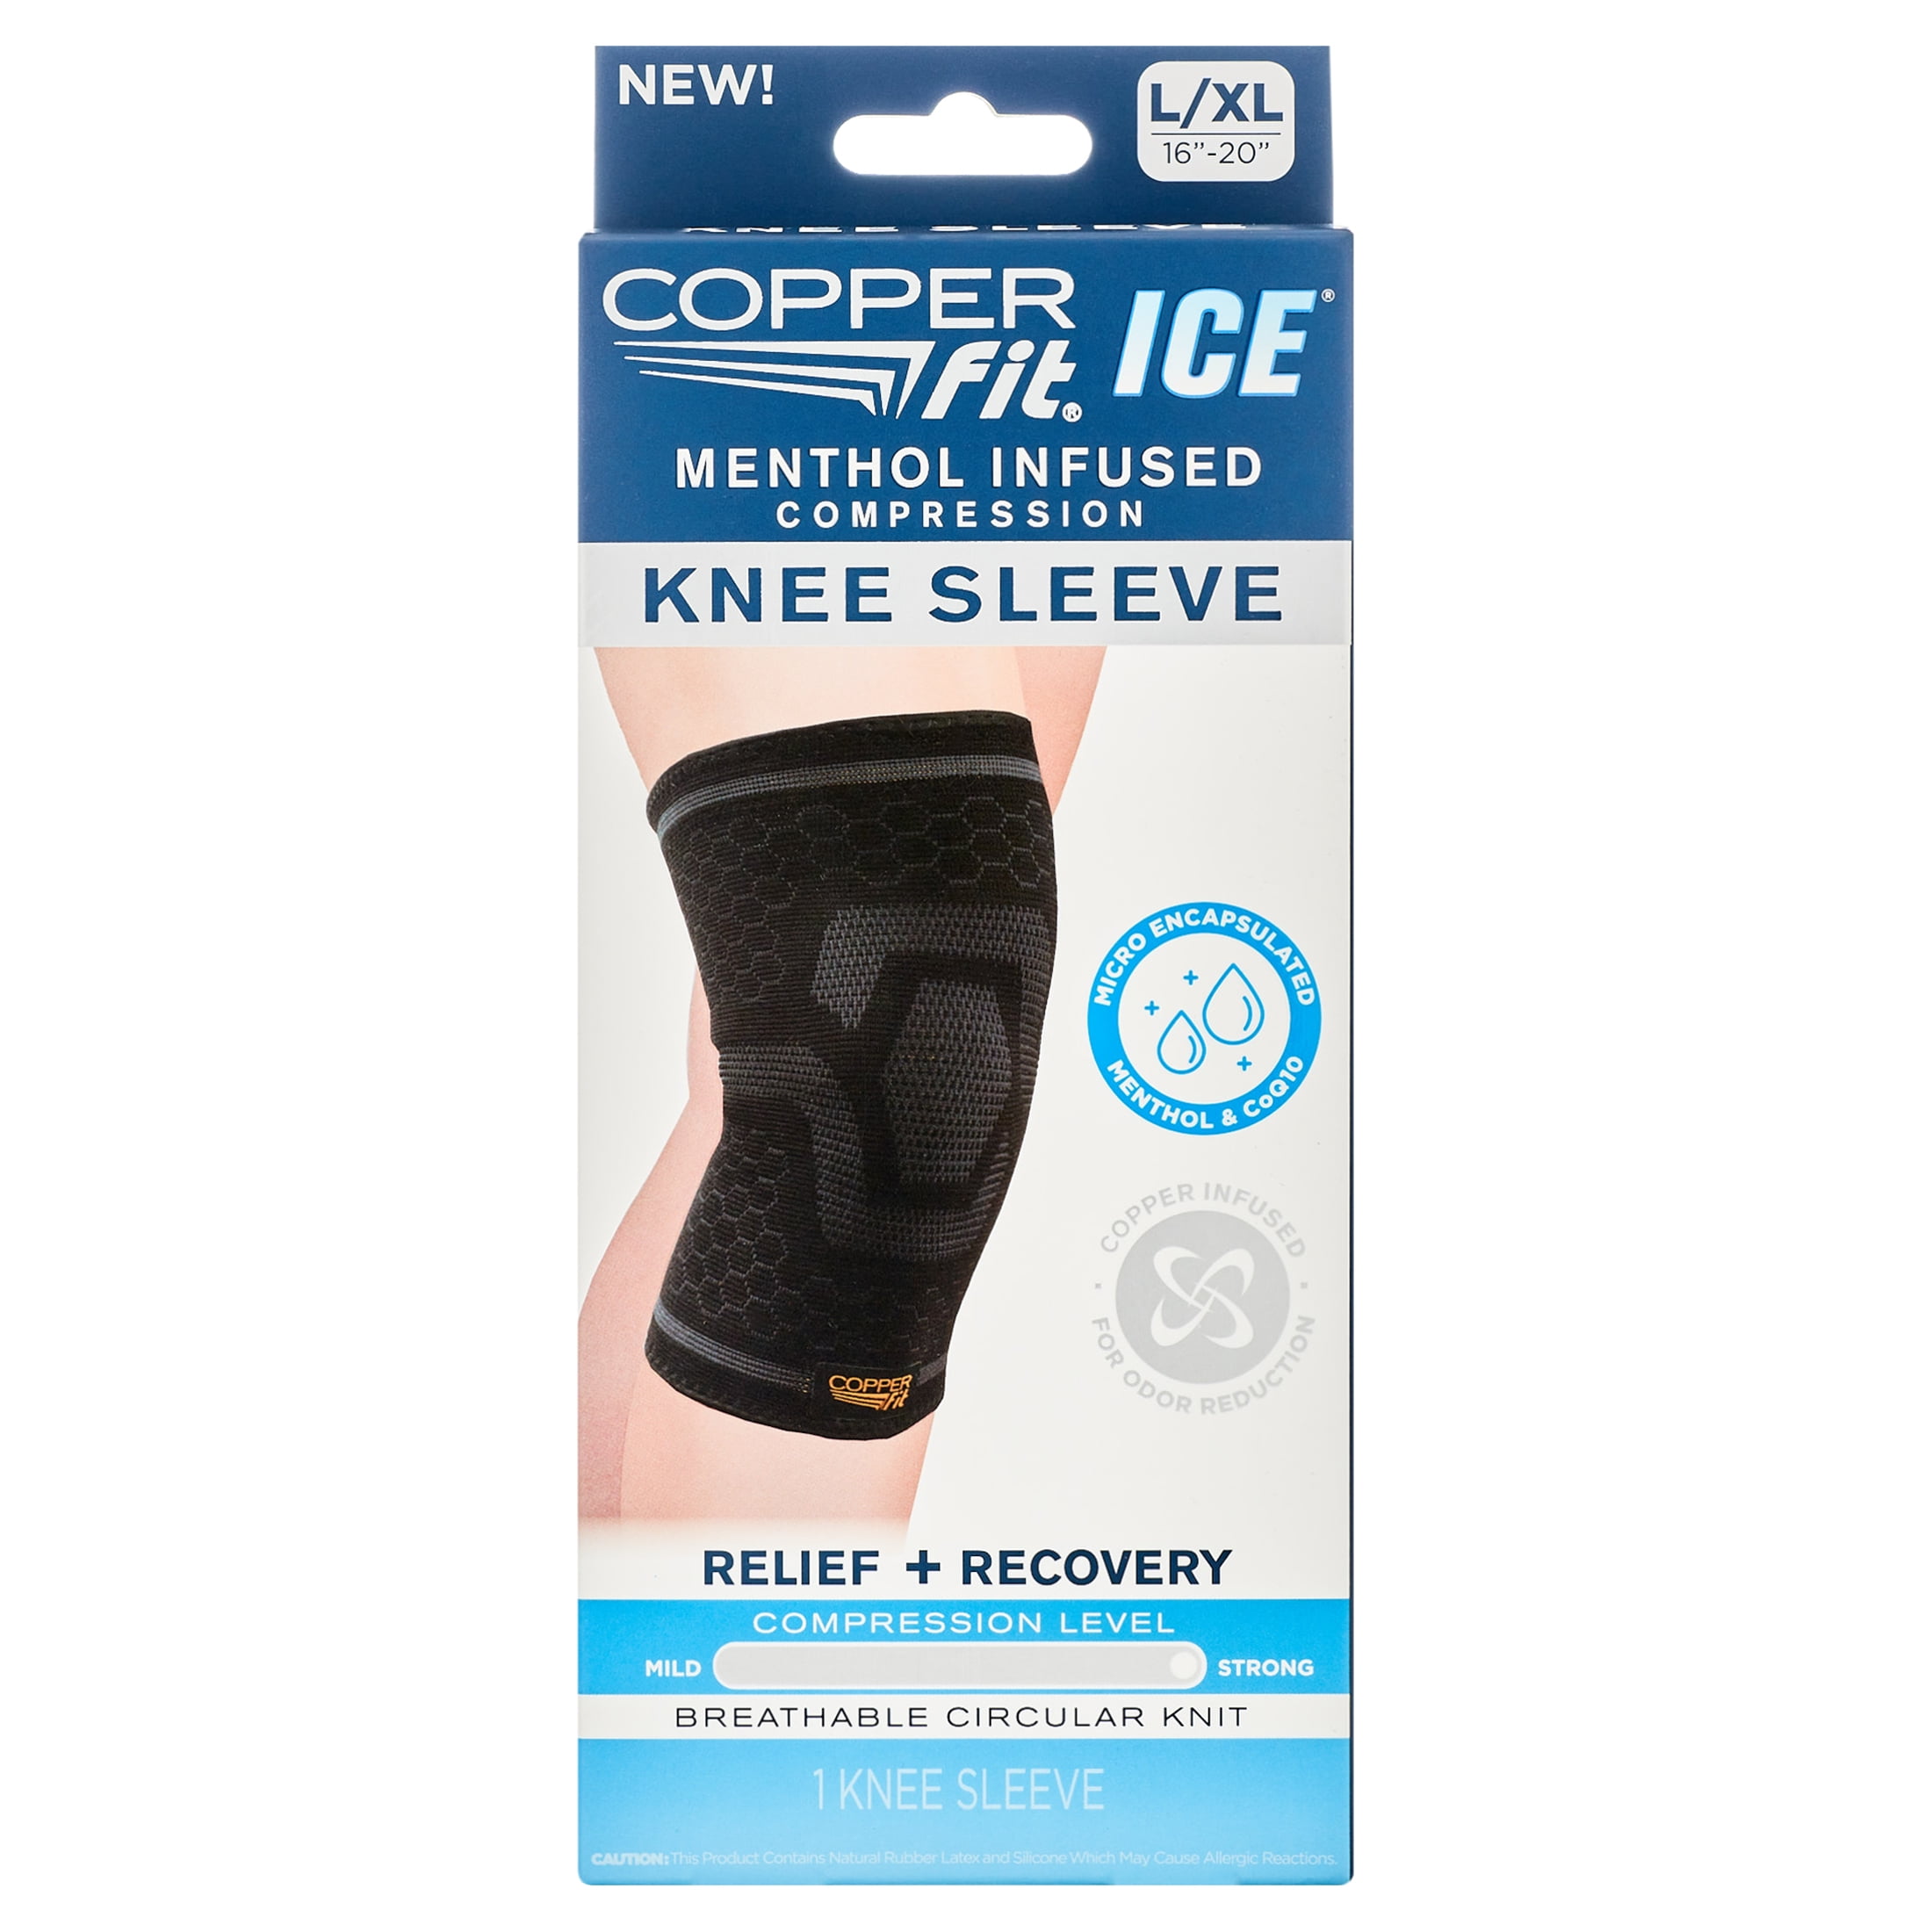 Copper Fit Pro Series Knee Compression Sleeve Black Large